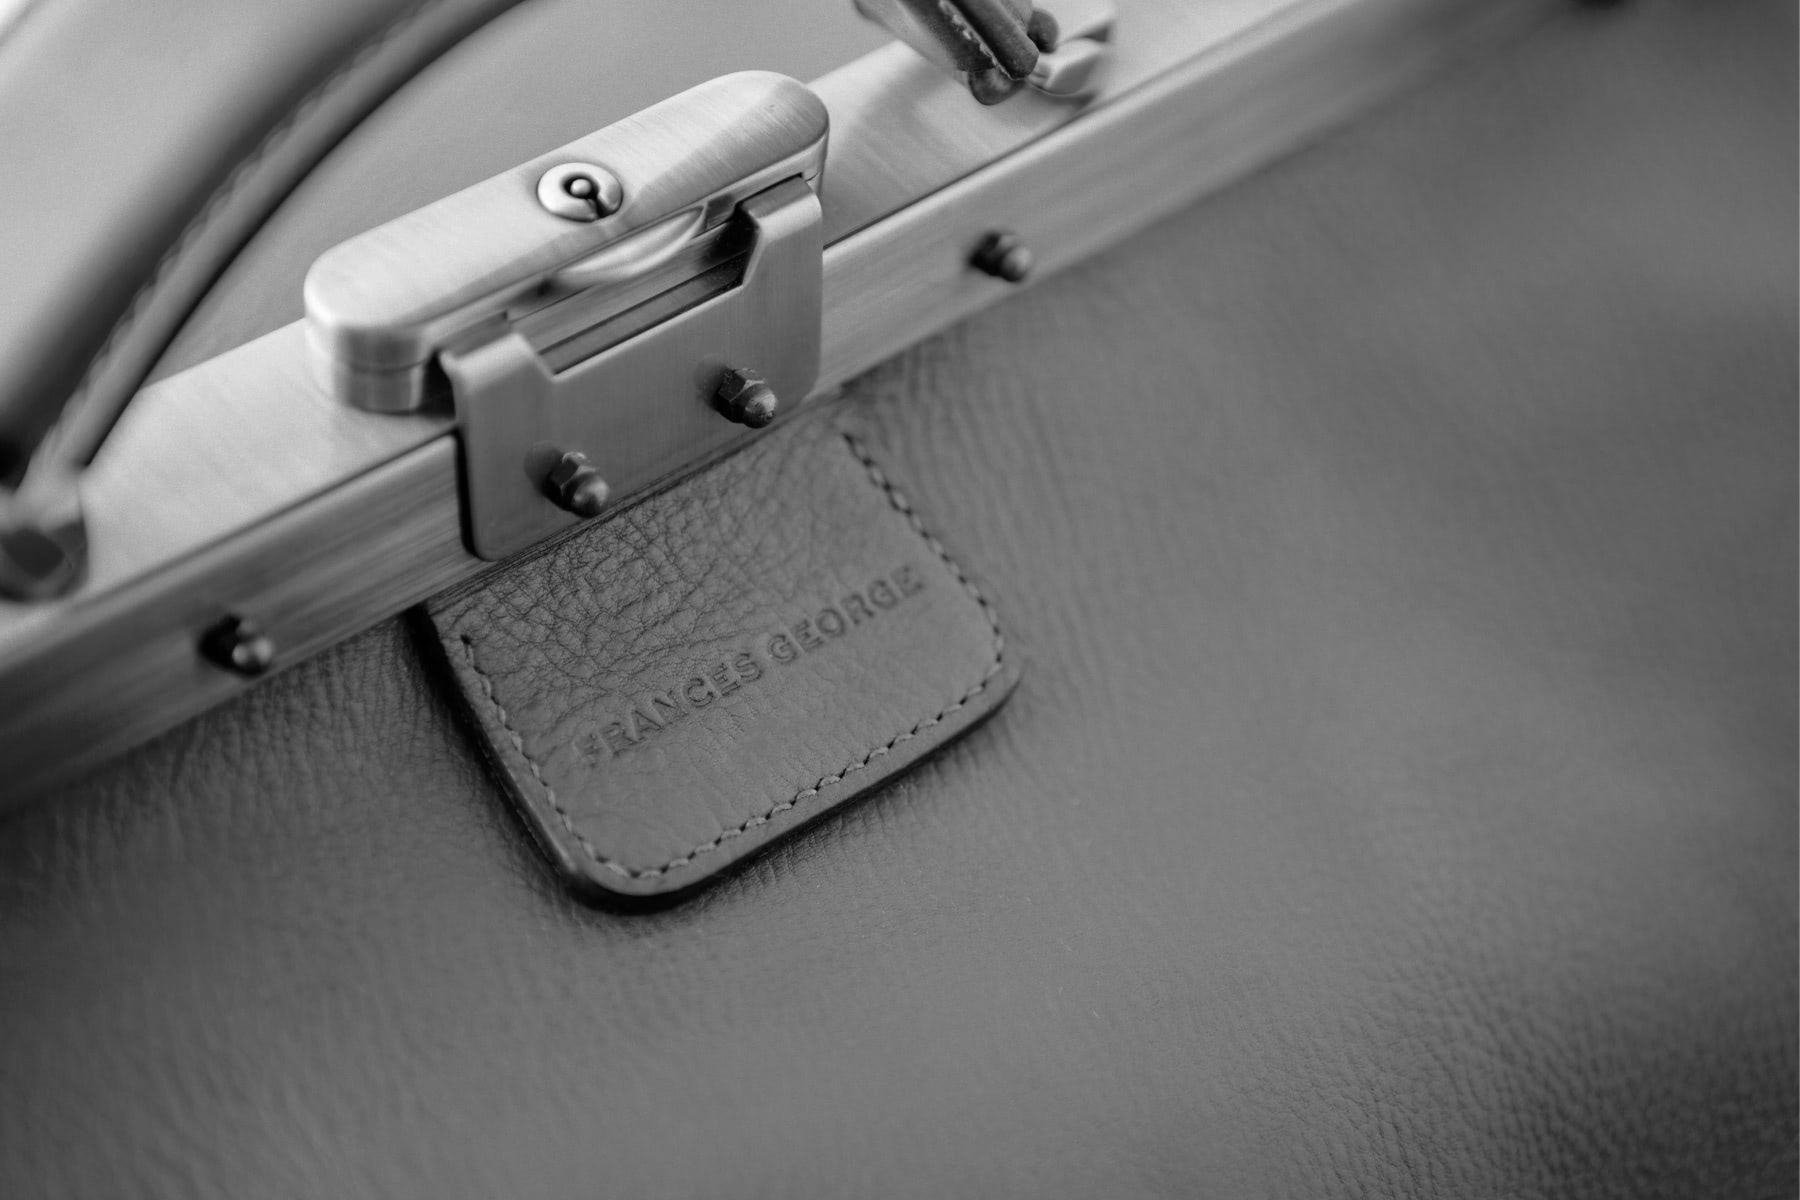 Artisan-made leather handbag by Frances George in New Zealand